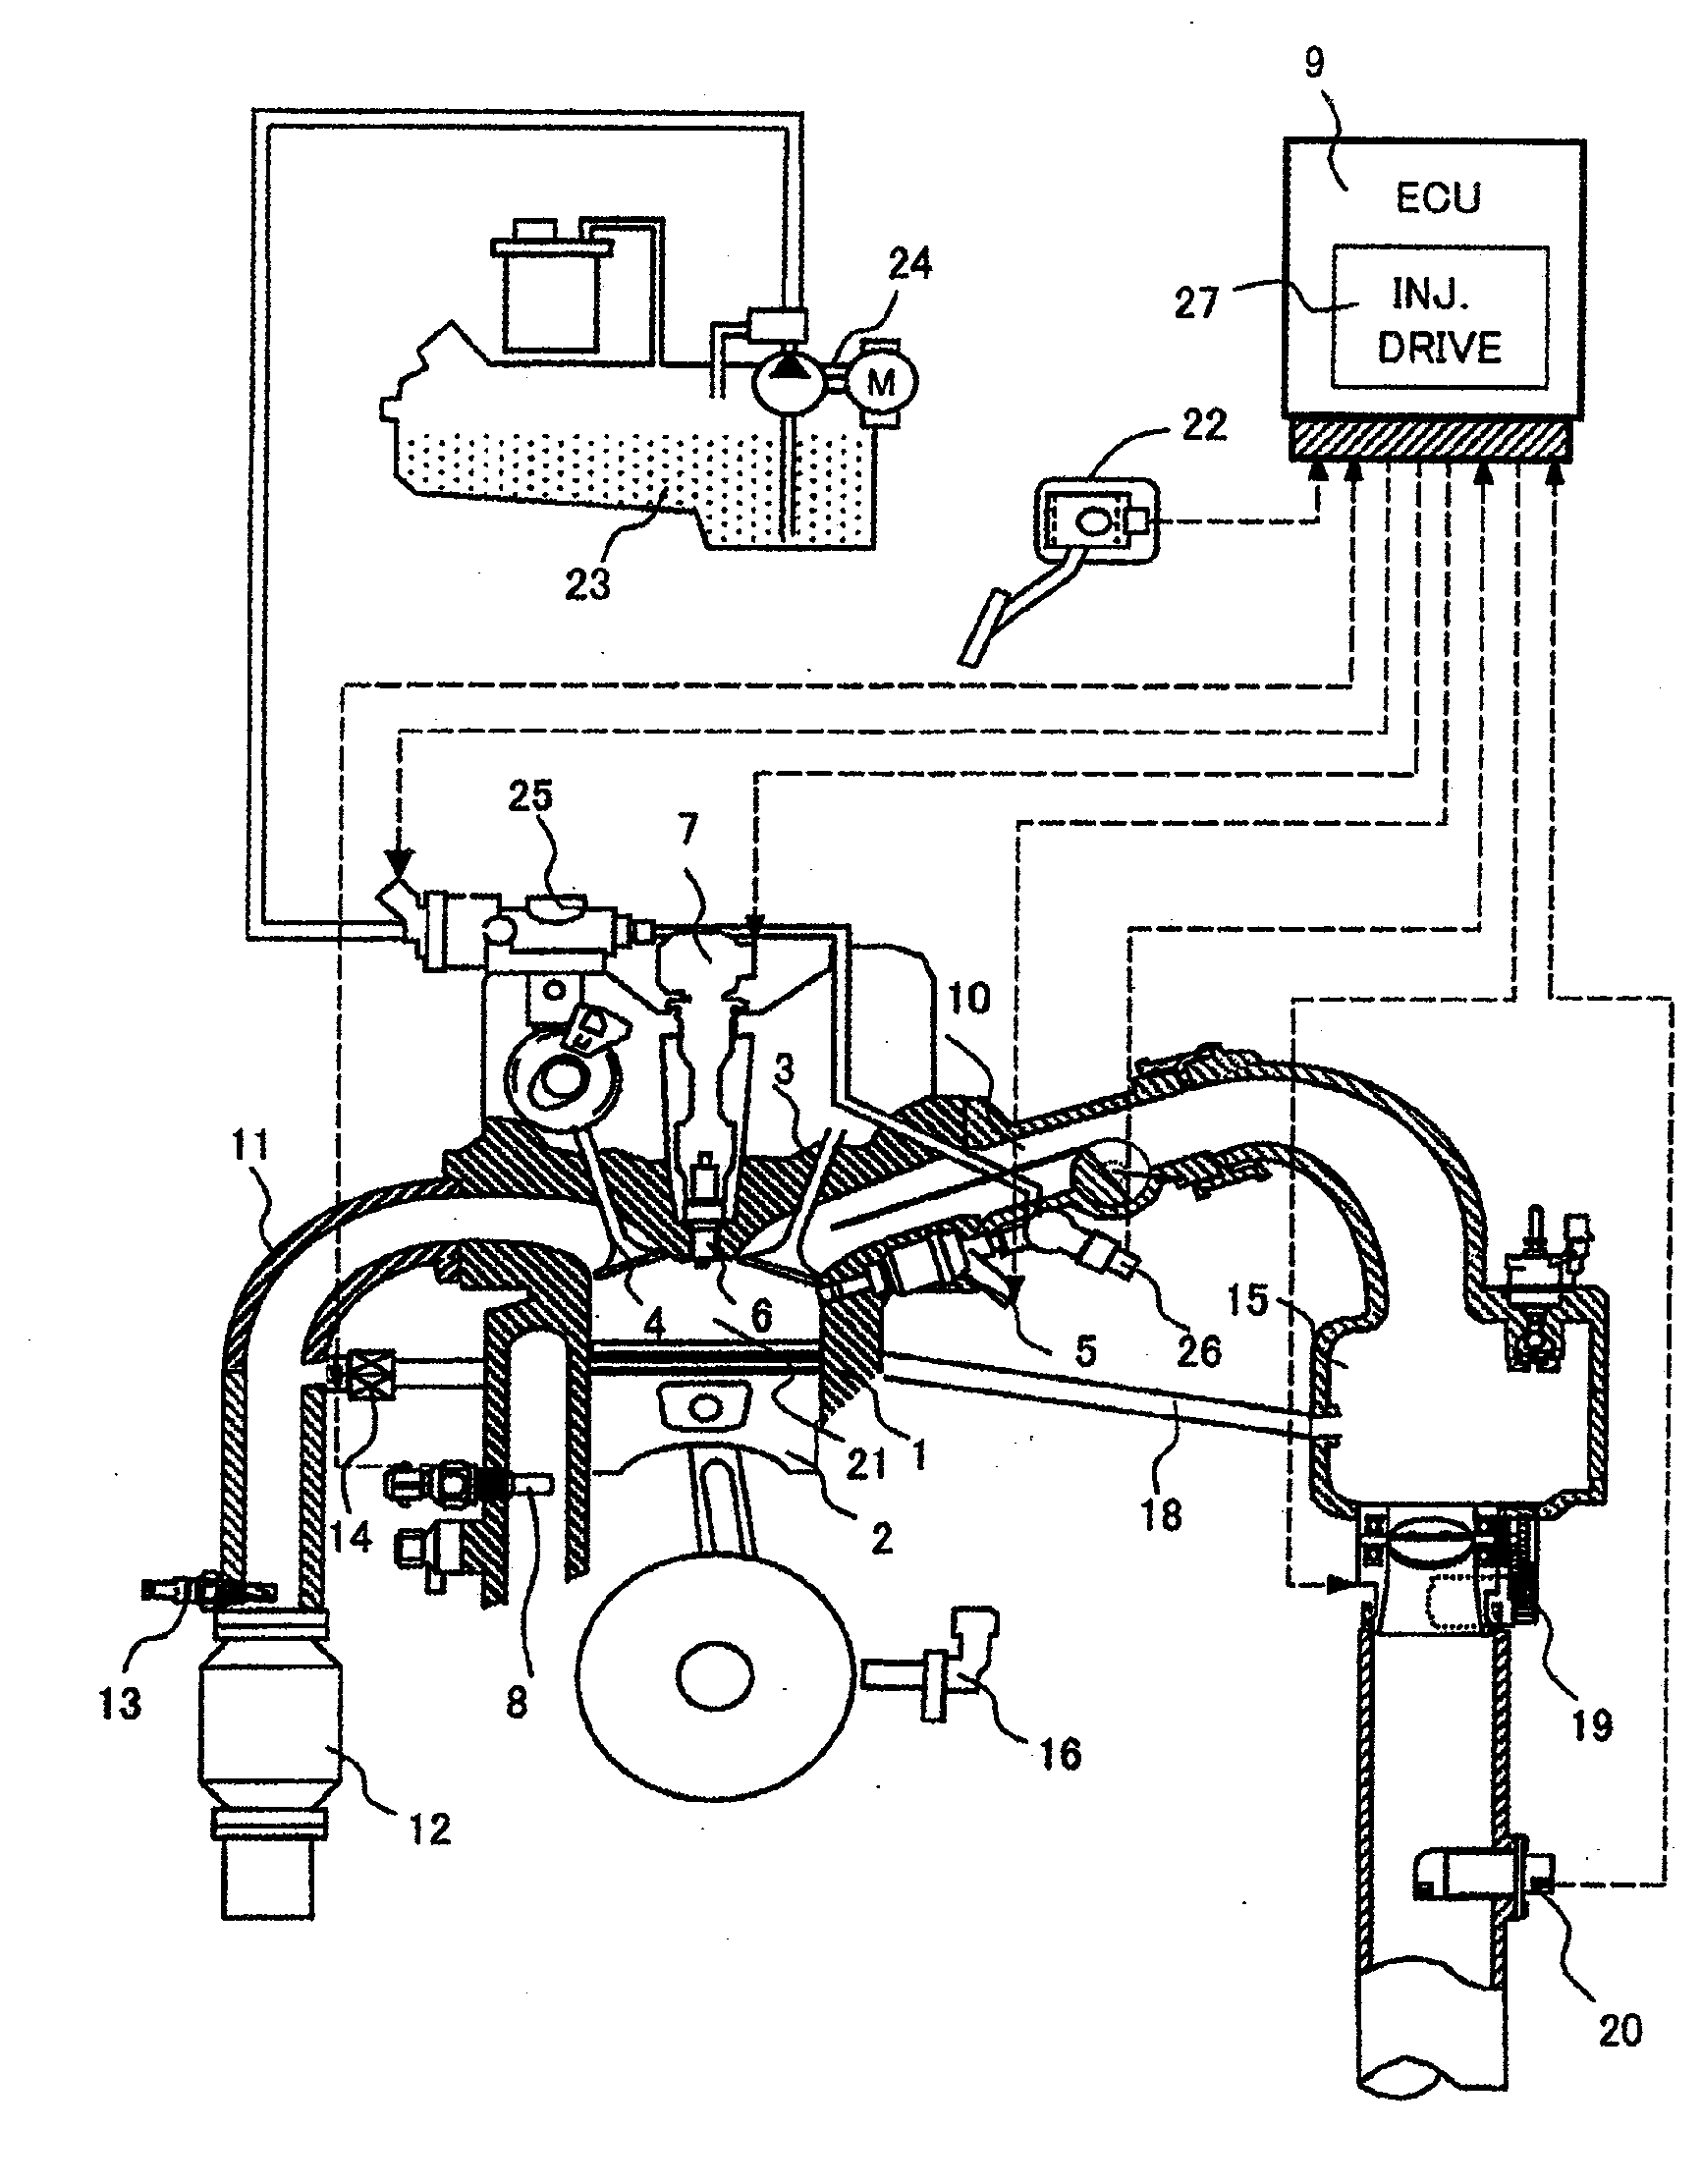 Fuel Injection Control Apparatus for Internal Combustion Engine